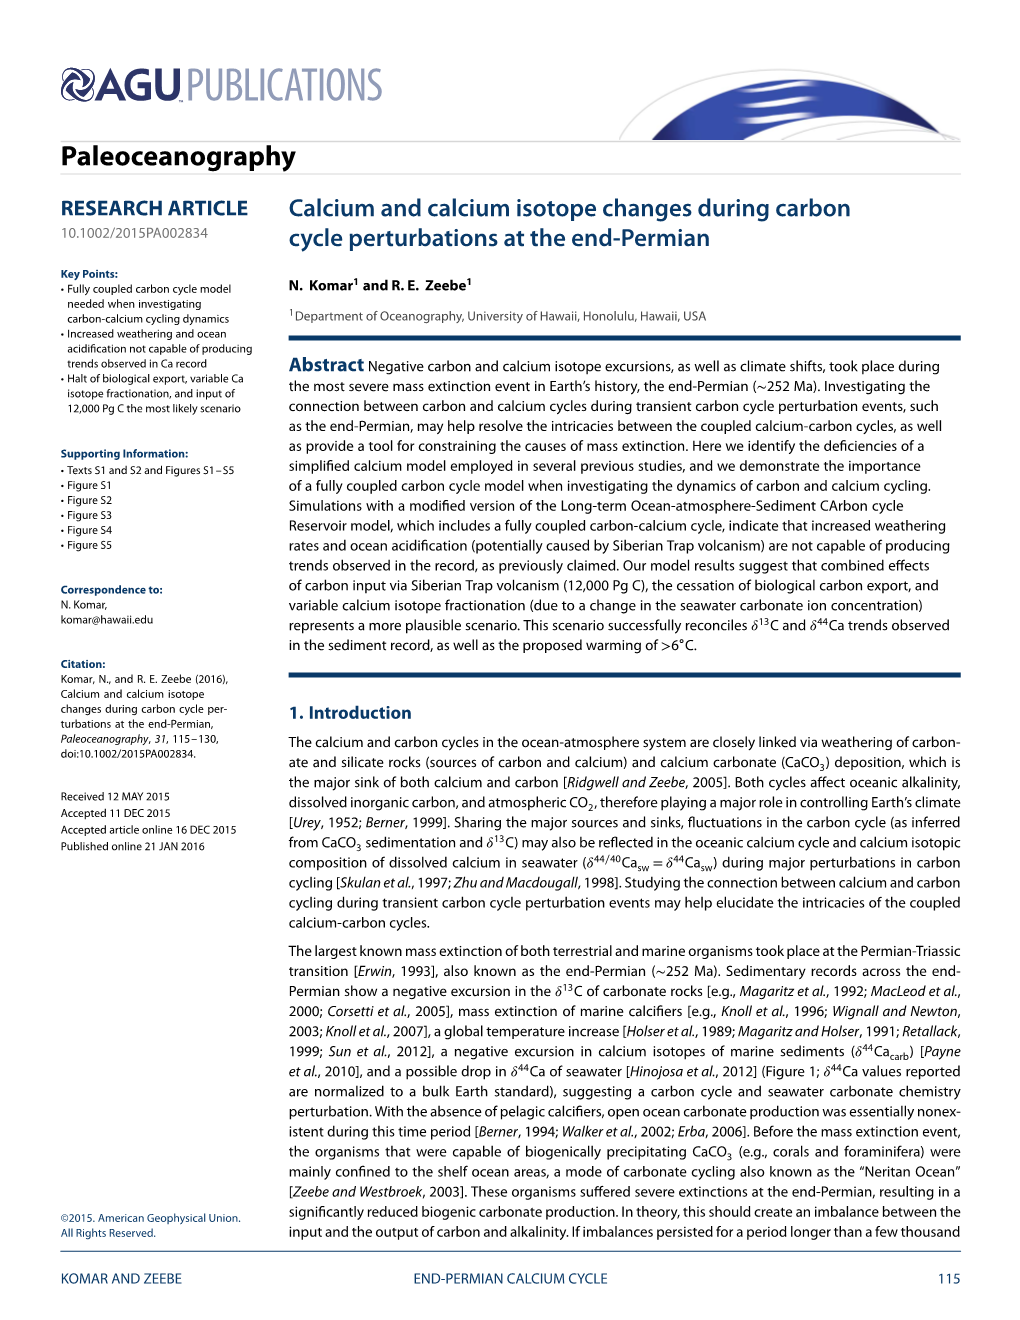 Calcium and Calcium Isotope Changes During Carbon Cycle Perturbations at the End-Permian